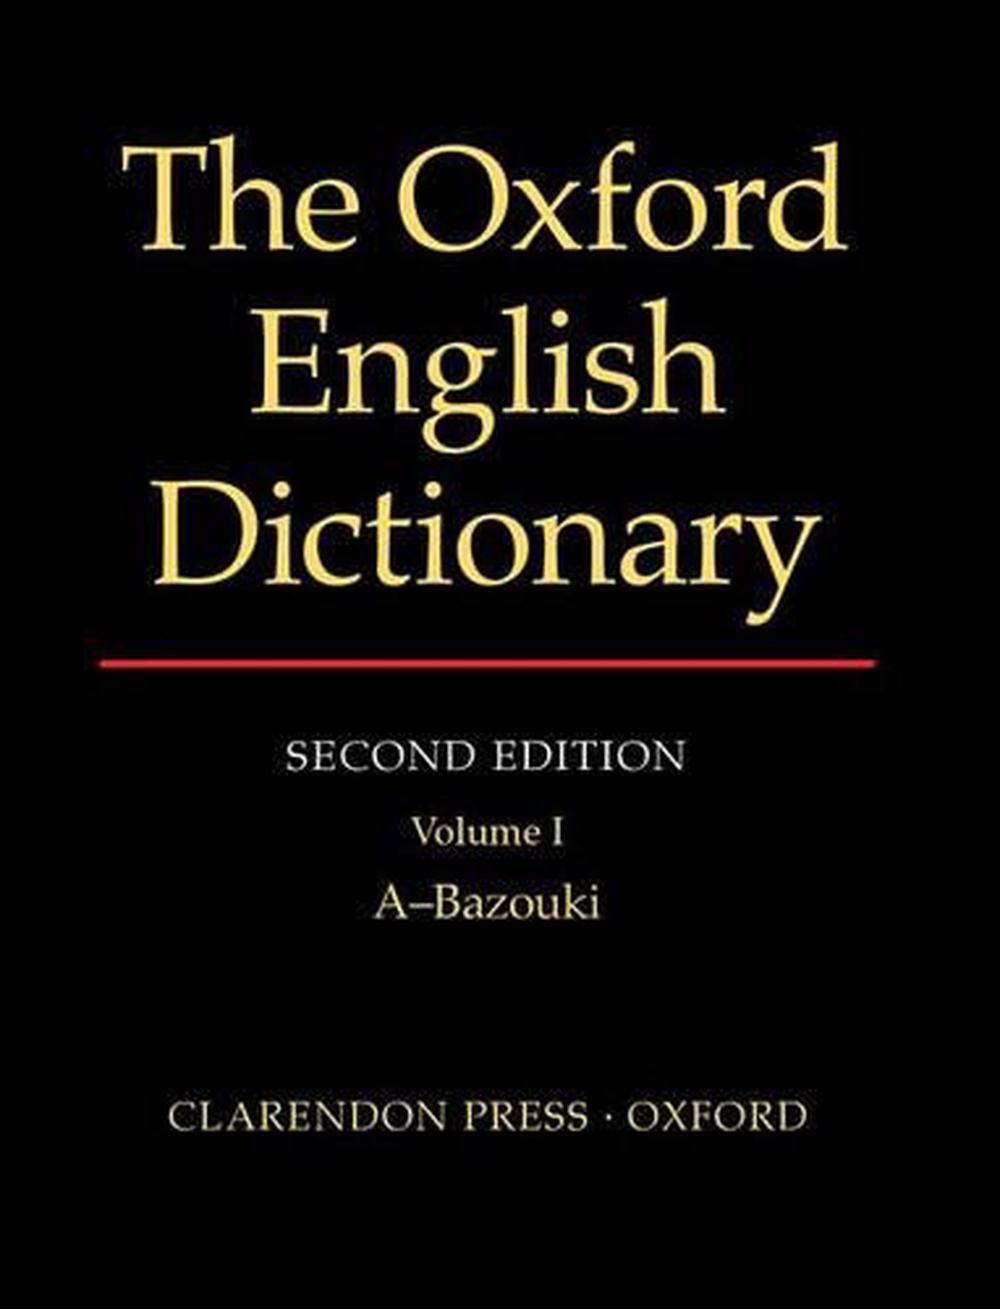 autobiography of oxford dictionary